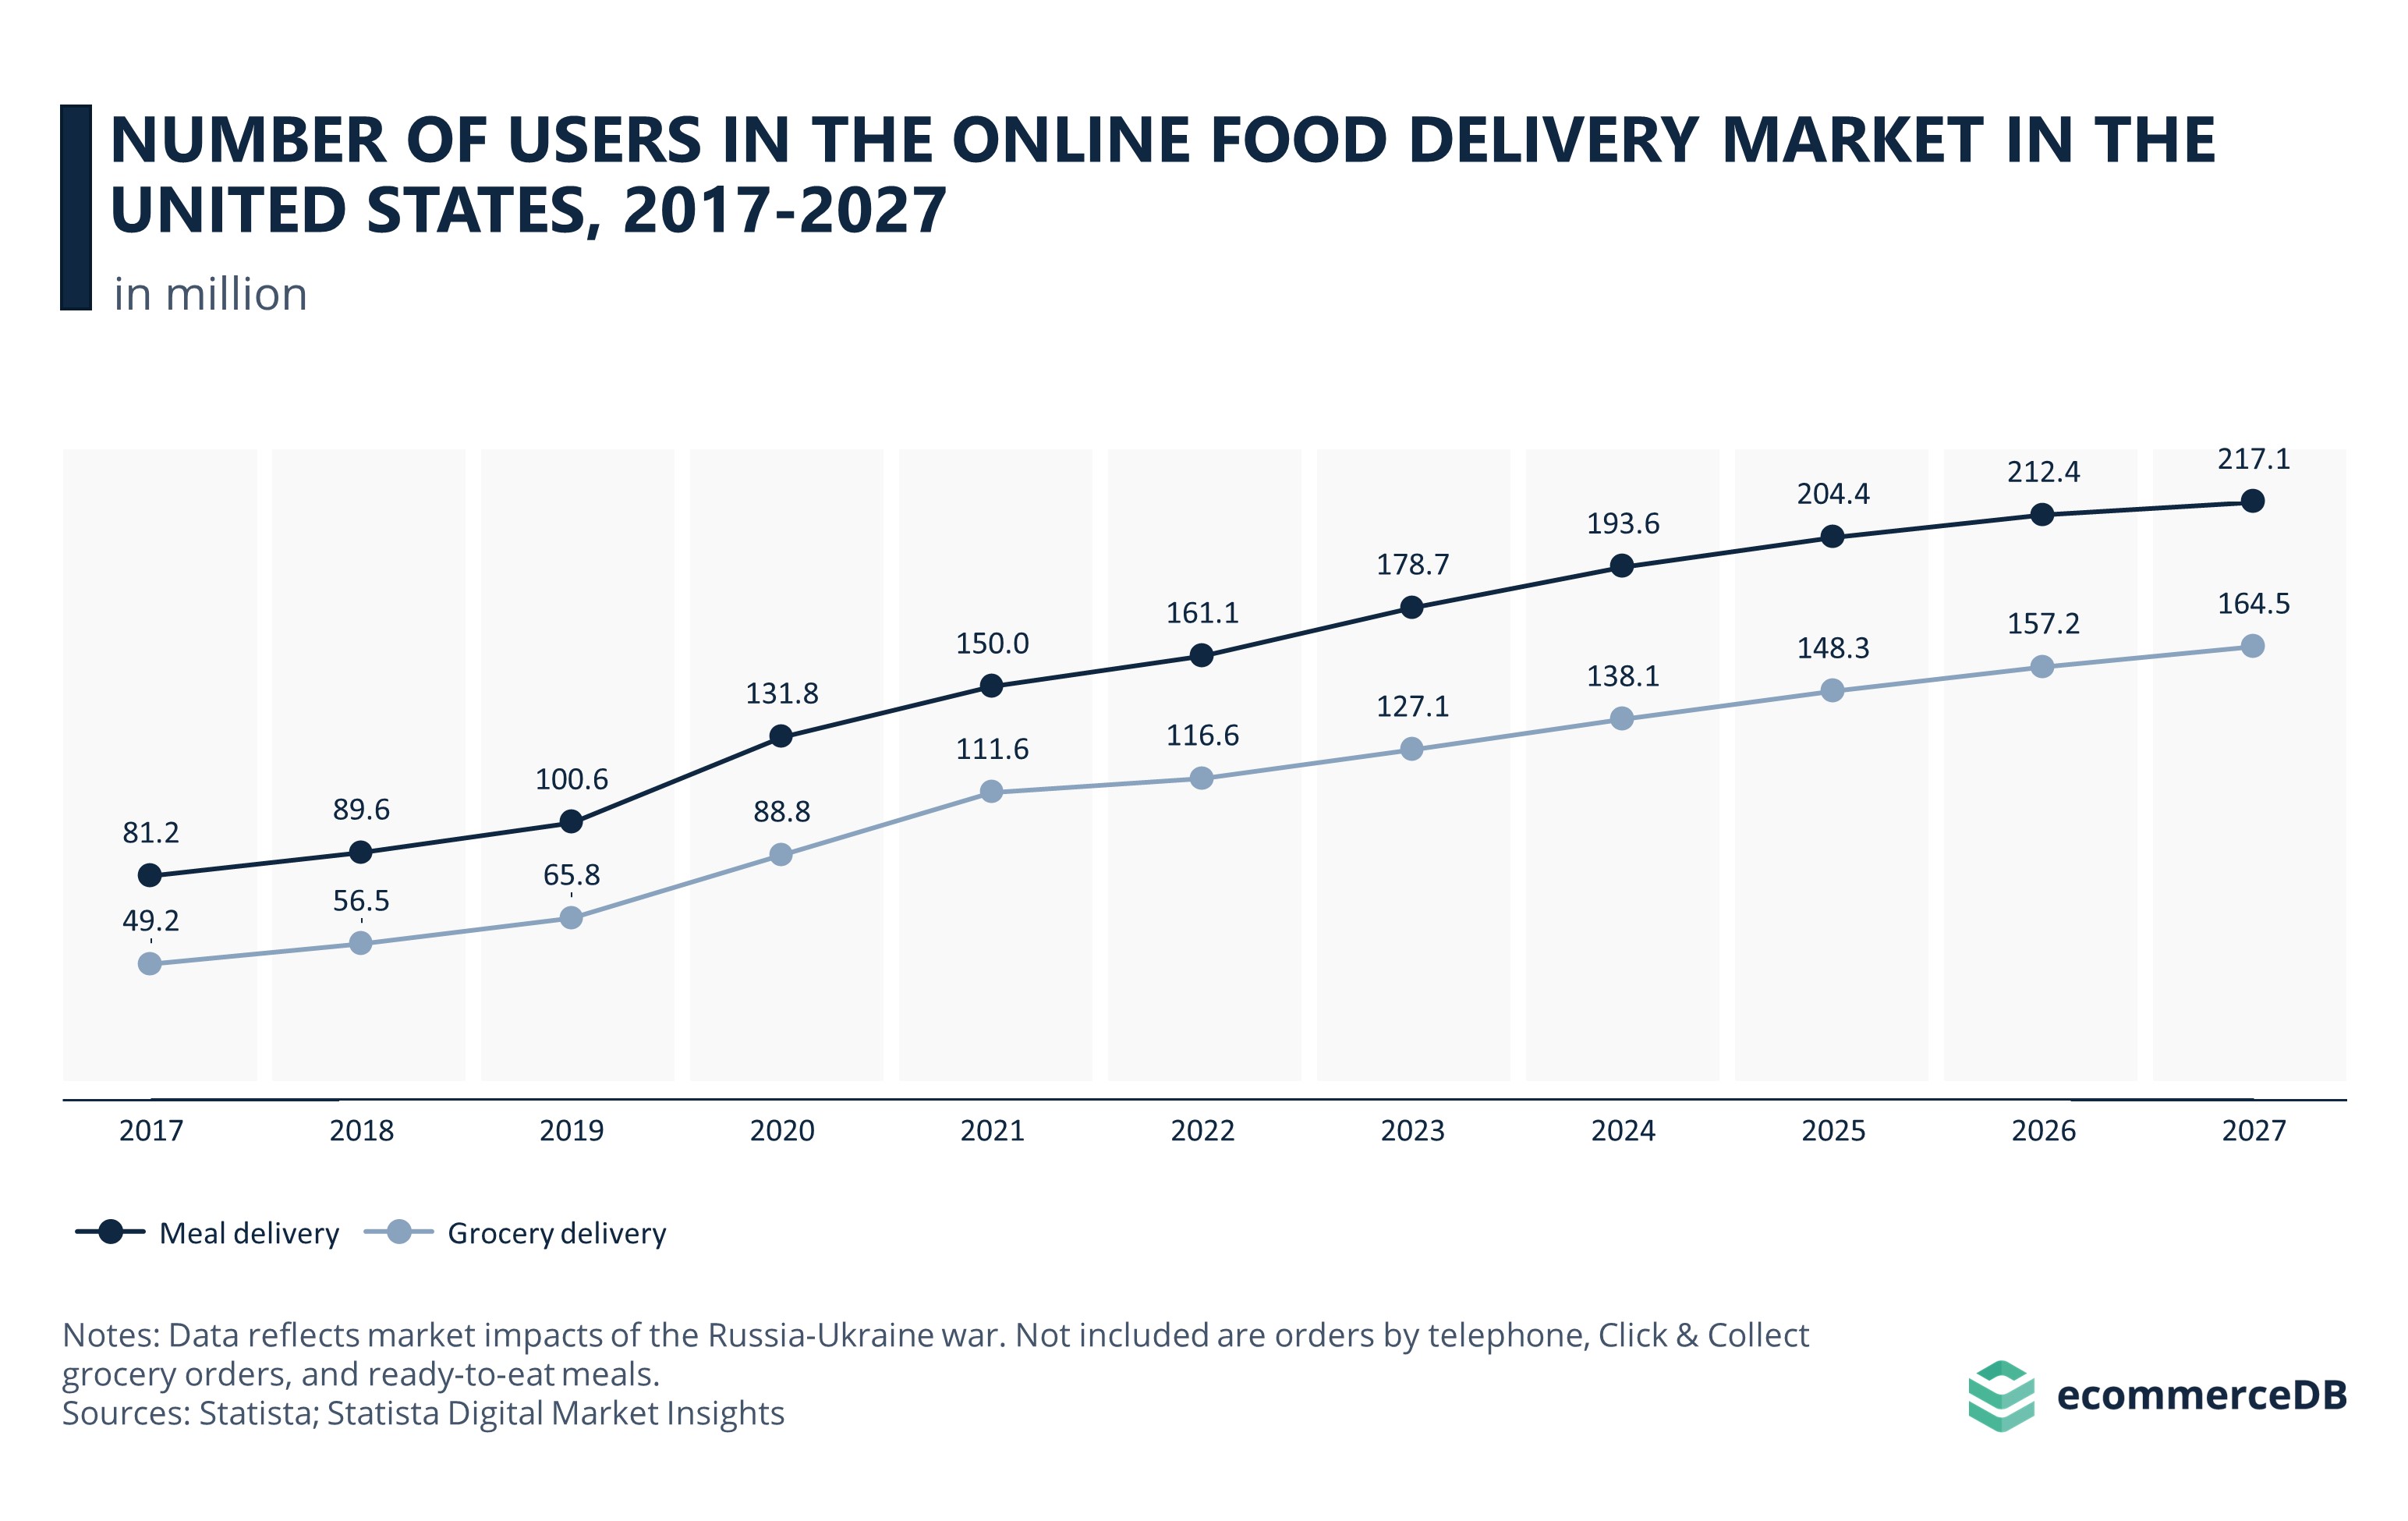 Number of users in the online food delivery market in the United States, 2017-2027